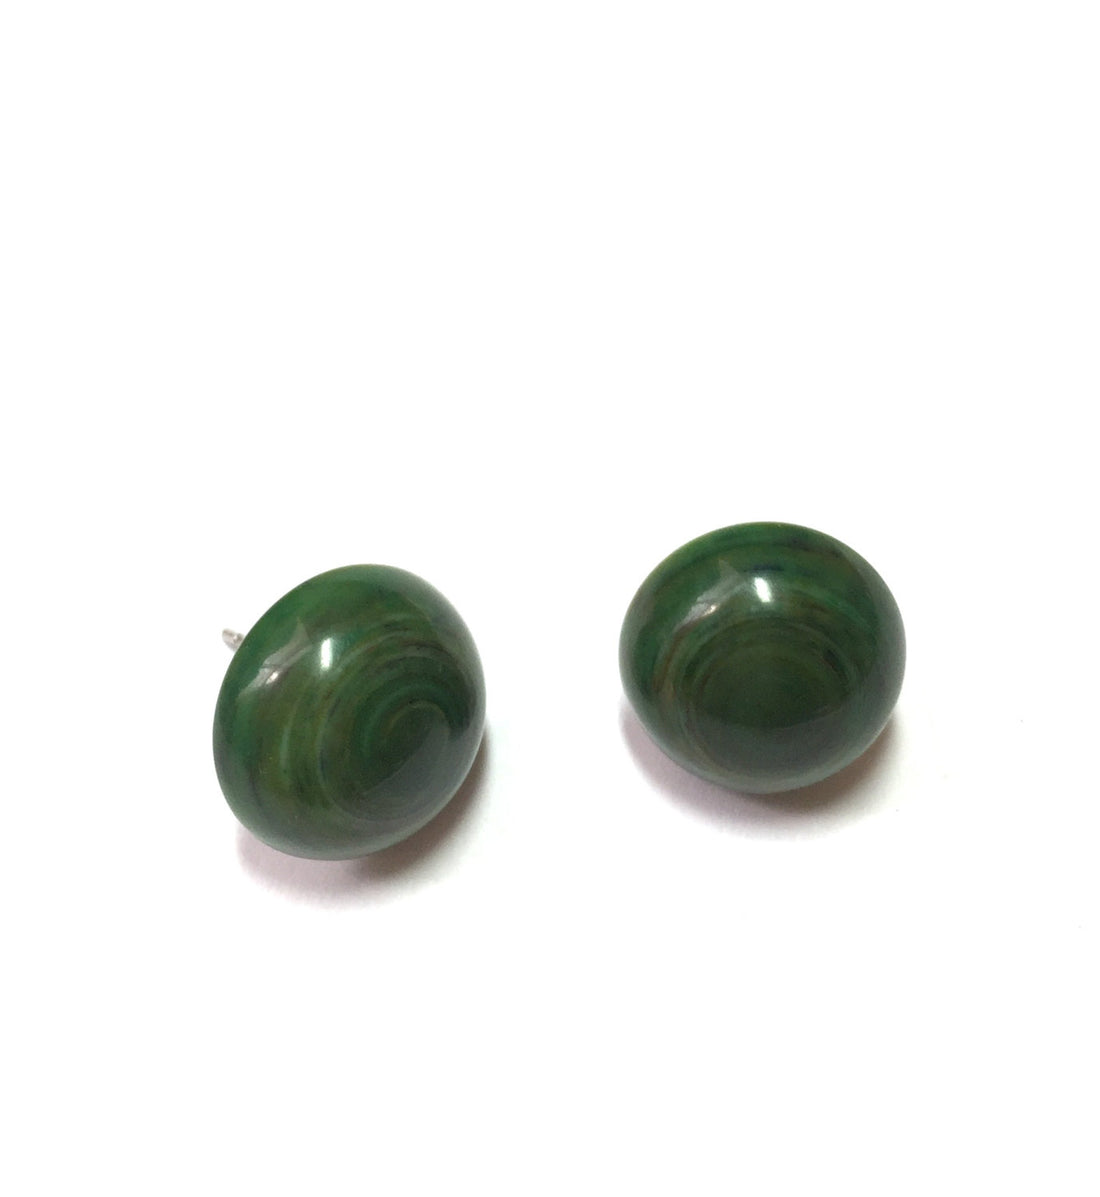 Dome disk green stud